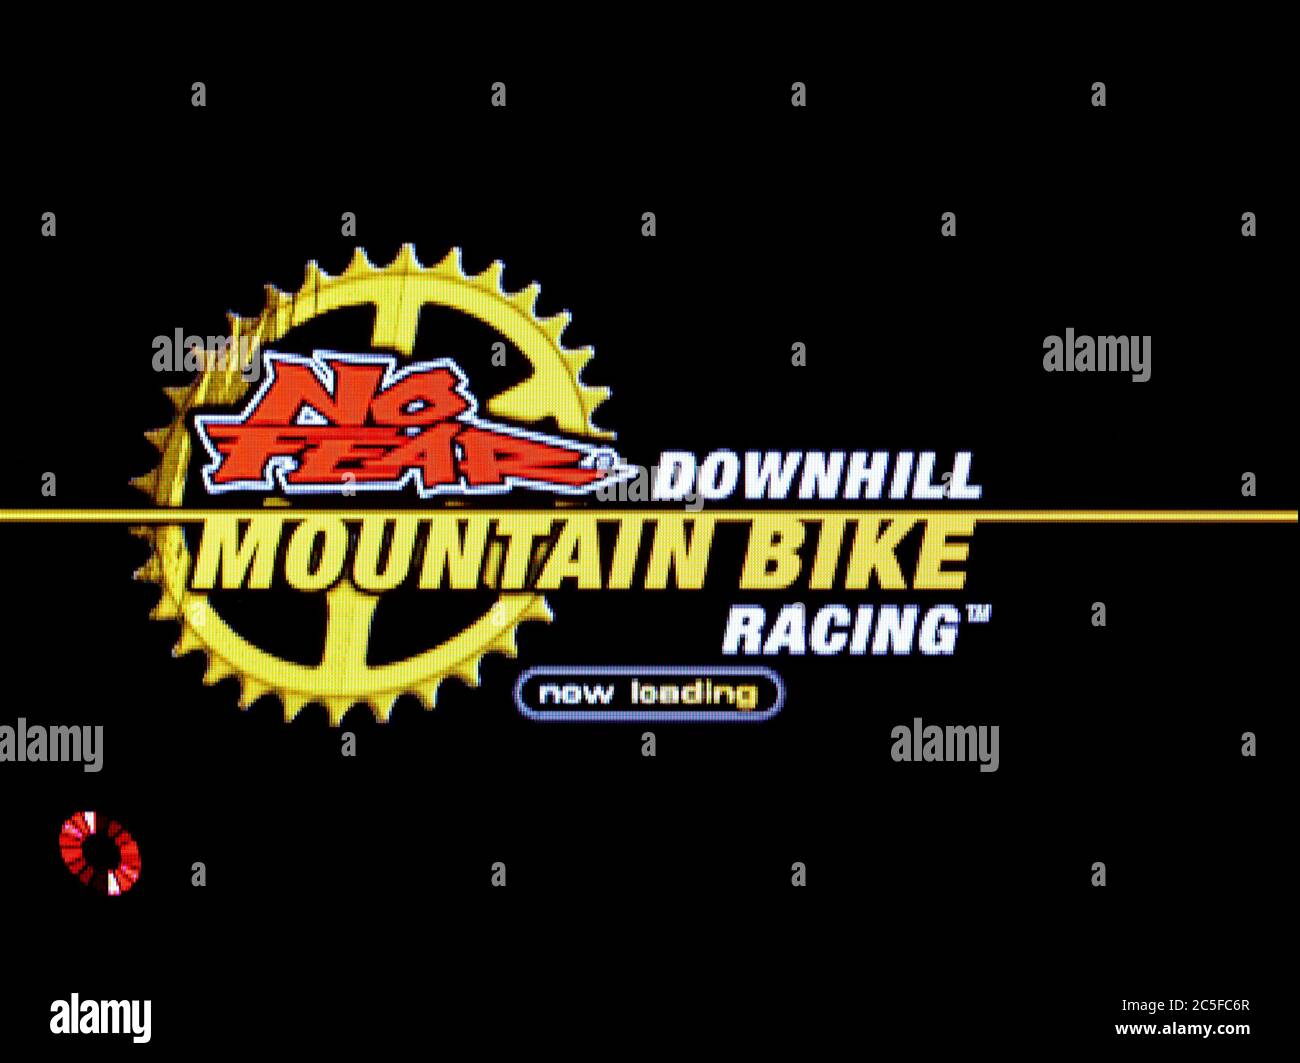 No Fear Downhill Mountain Bike Racing - Sony PlayStation 1 PS1 PSX - usage éditorial exclusif Banque D'Images